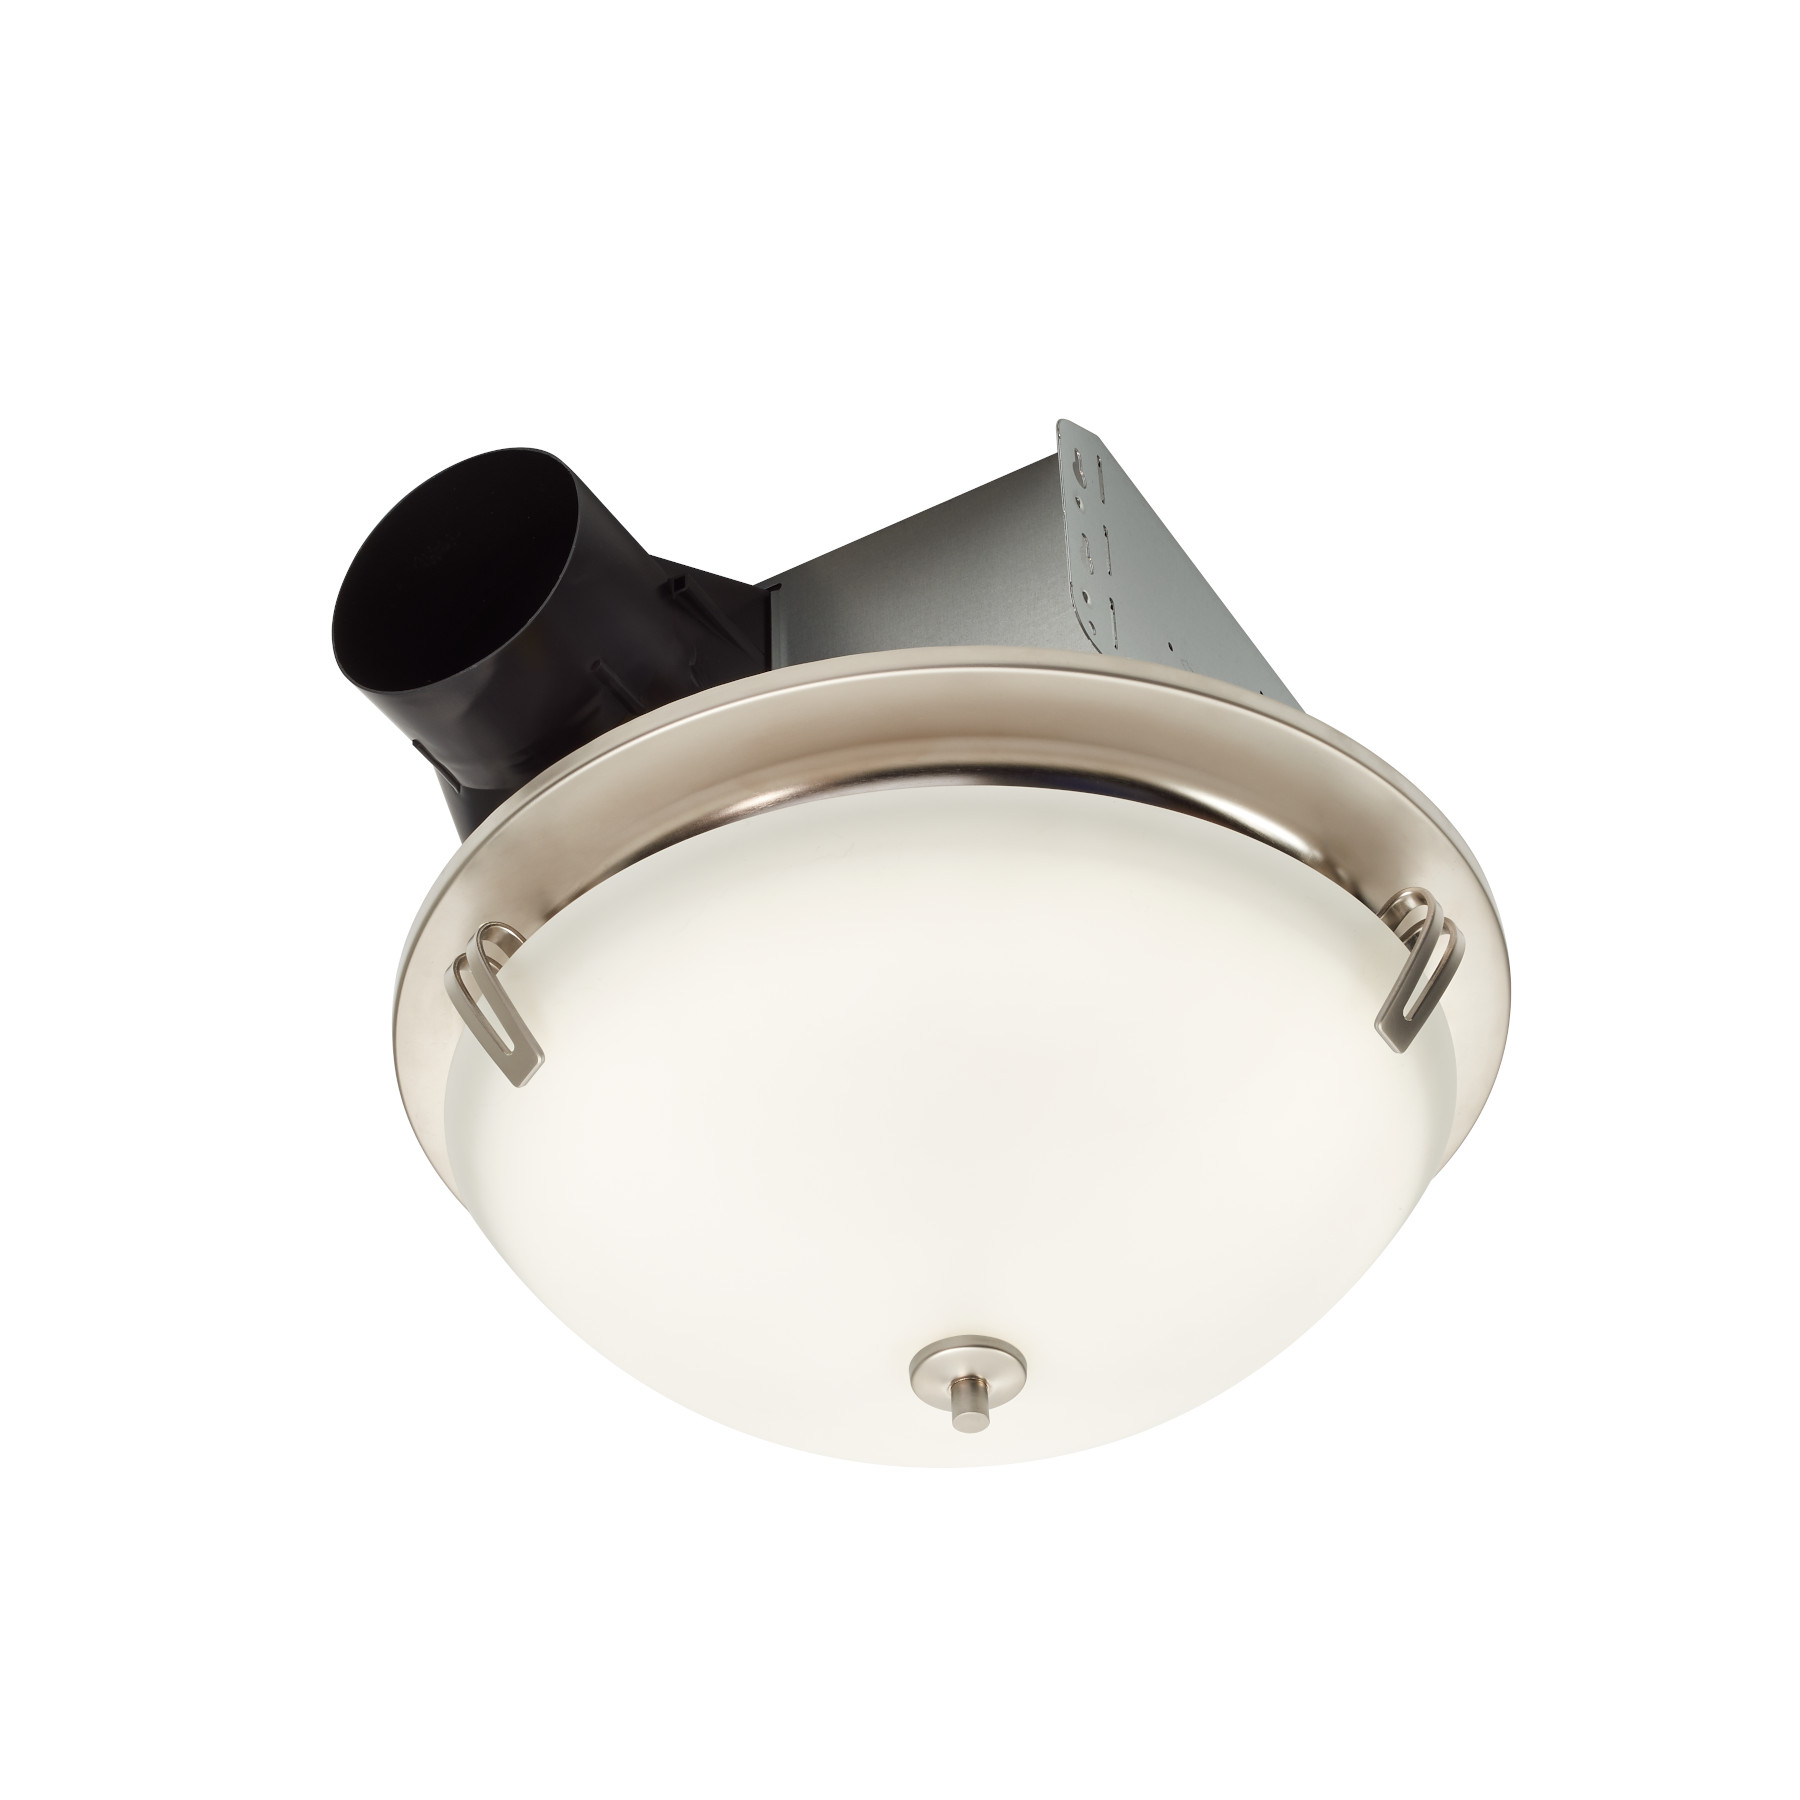 Roomside Decorative Satin Nickel 100 CFM Ceiling Roomside Install Bathroom Exhaust Fan w/ Light and Globe ENERGY STAR®